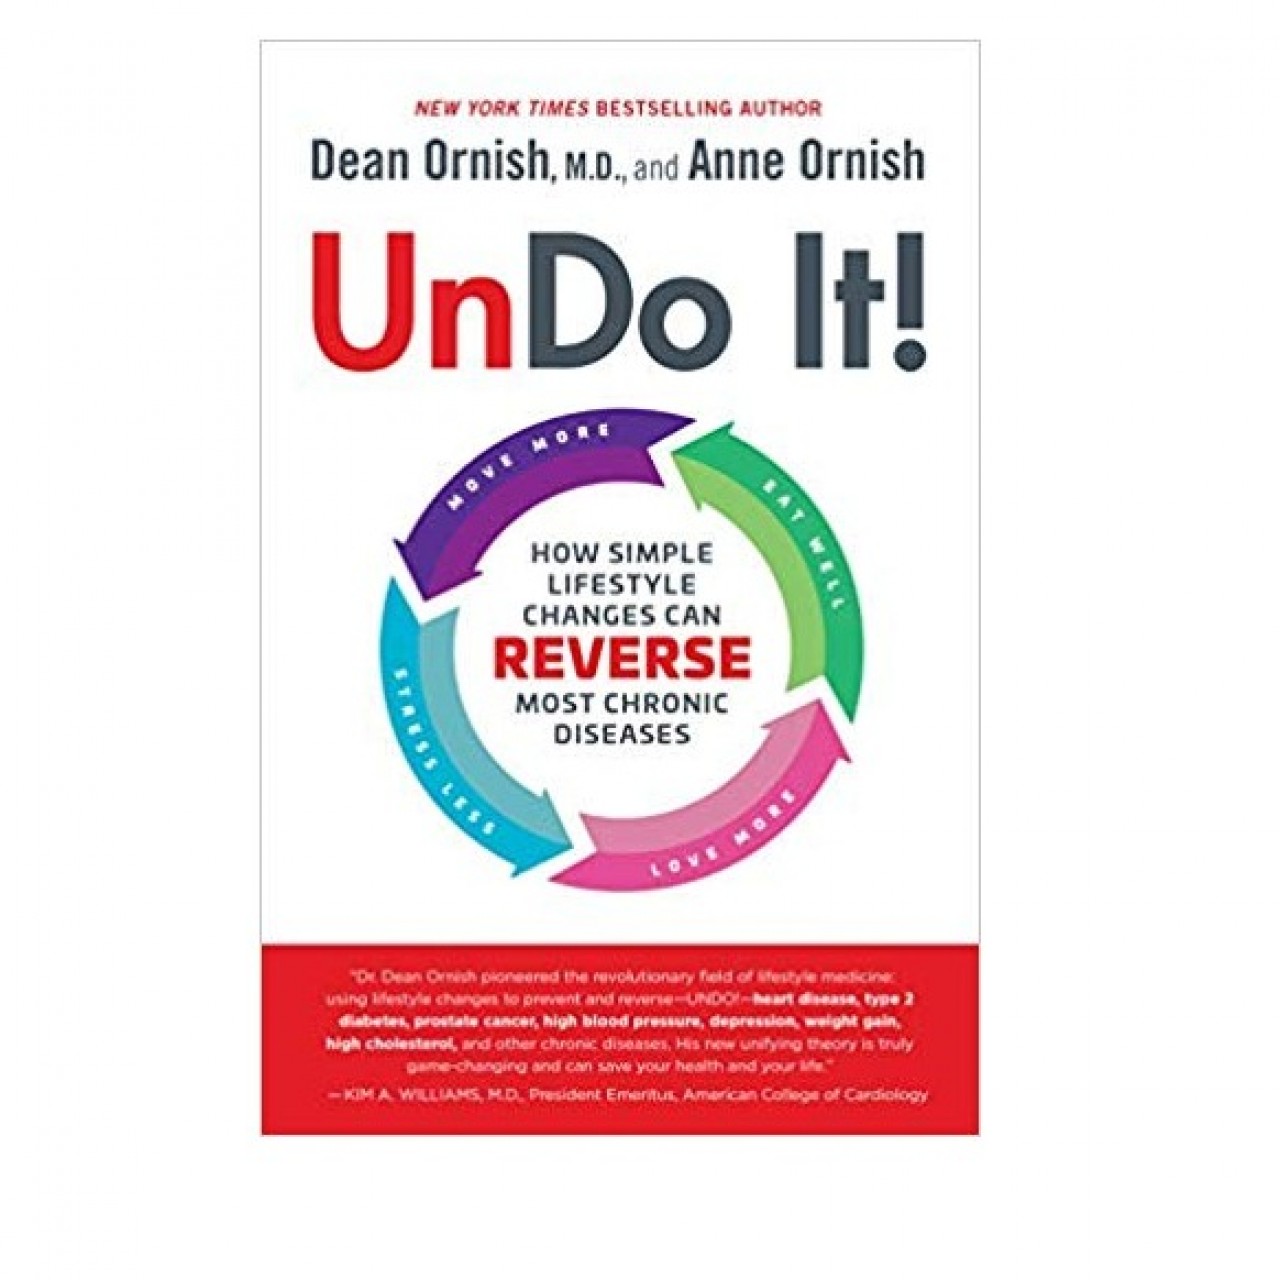 Undo It: How Simple Lifestyle Changes Can Reverse Most Chronic Diseases by Dean Ornish